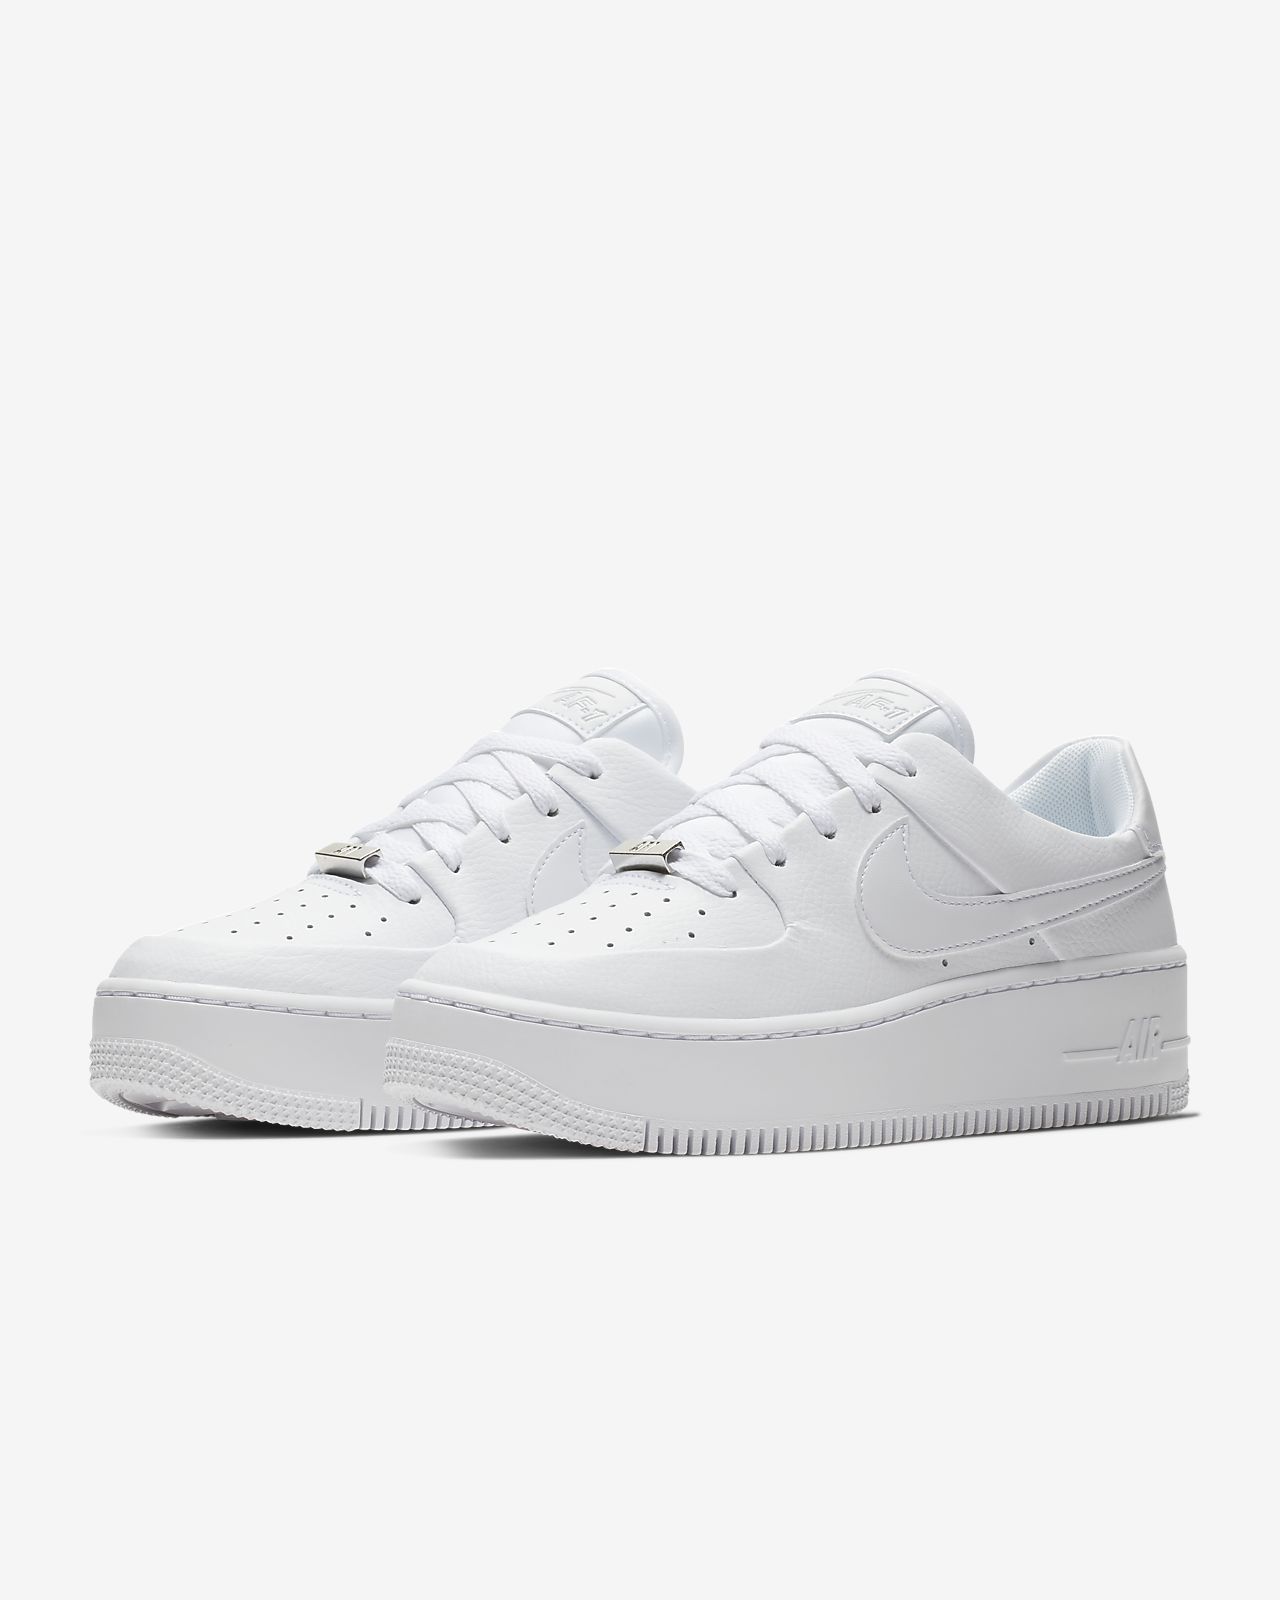 nike air force 1 size 7.5 womens 